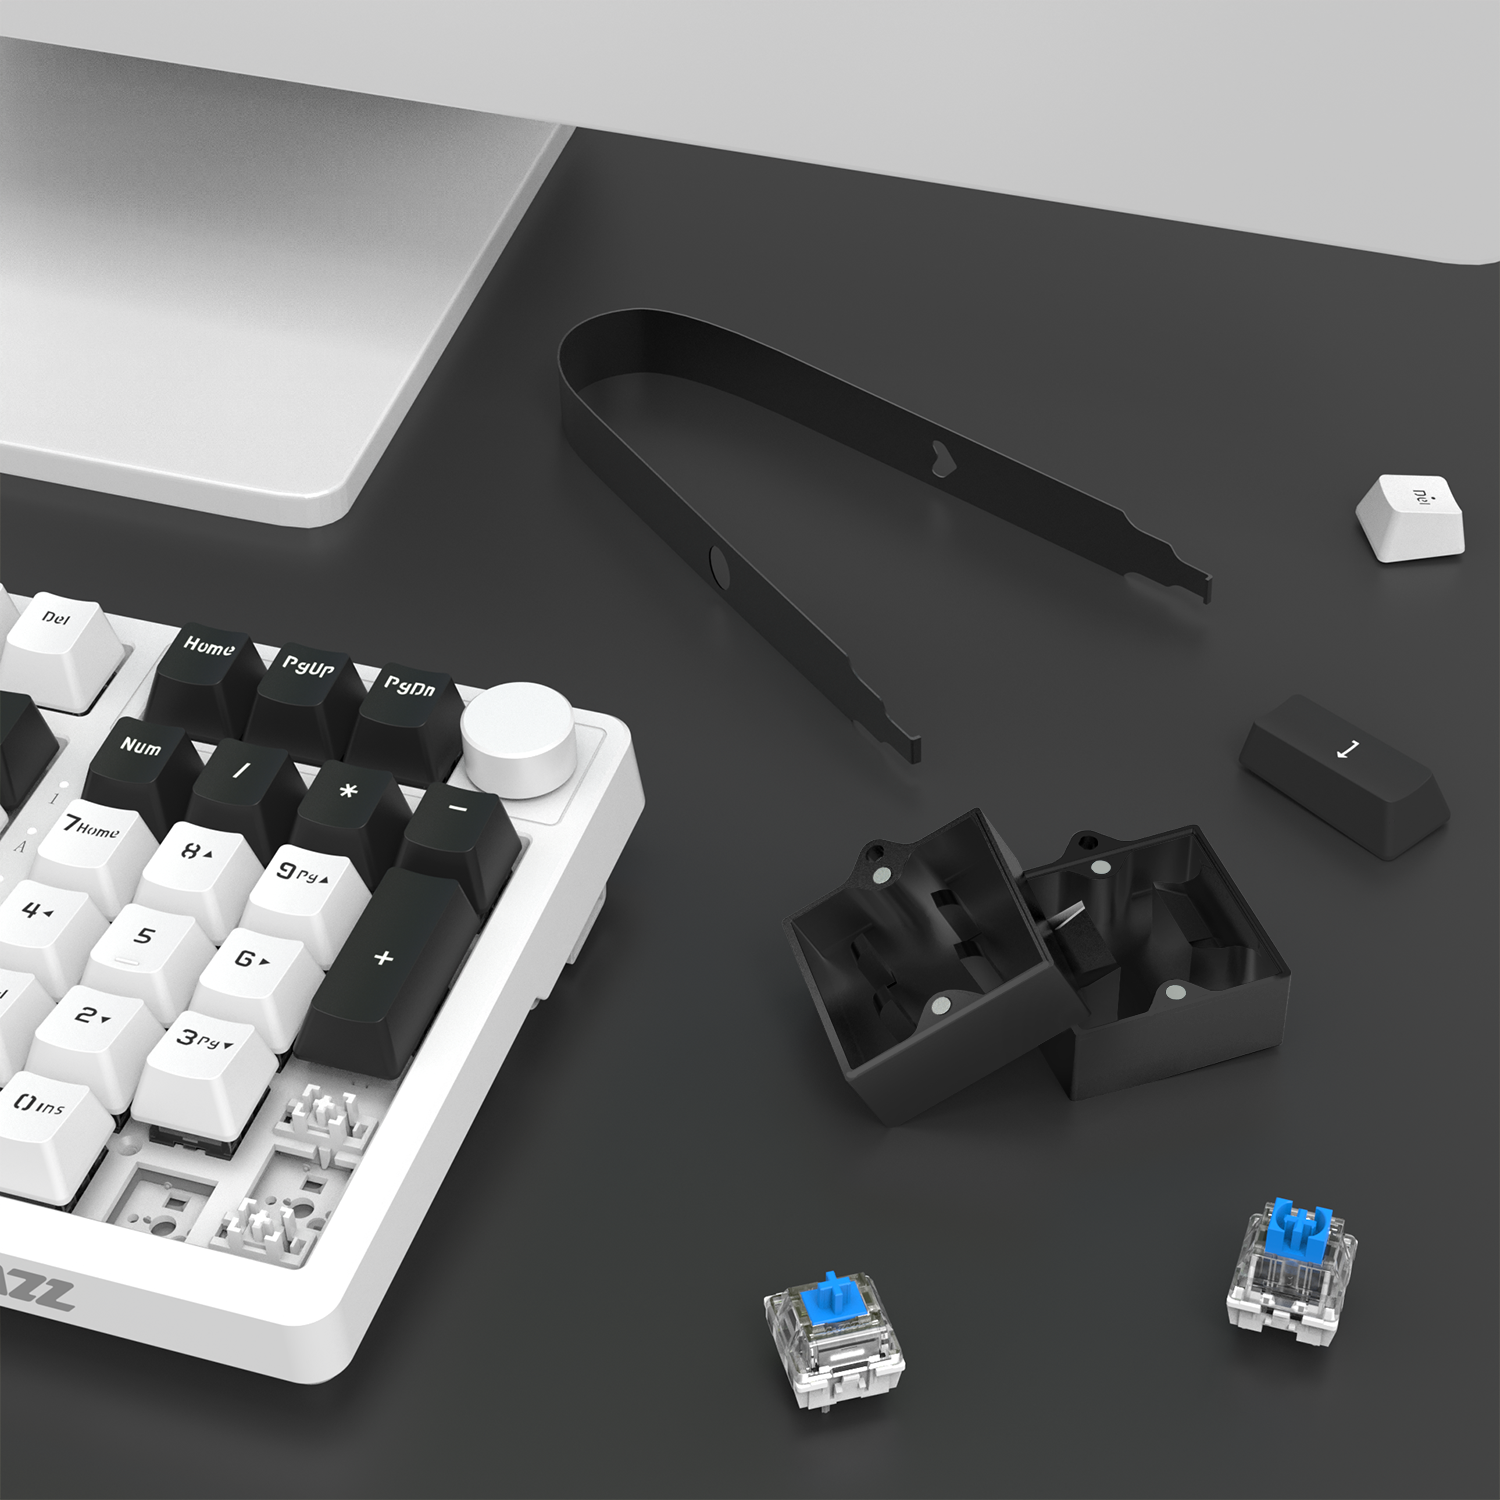 Switch Opener Kit with Switch Puller, Aluminum Mechanical Keyboard Switch Opener for Cherry MX Gateron Kailh Box Outemu Akko Panda Switch